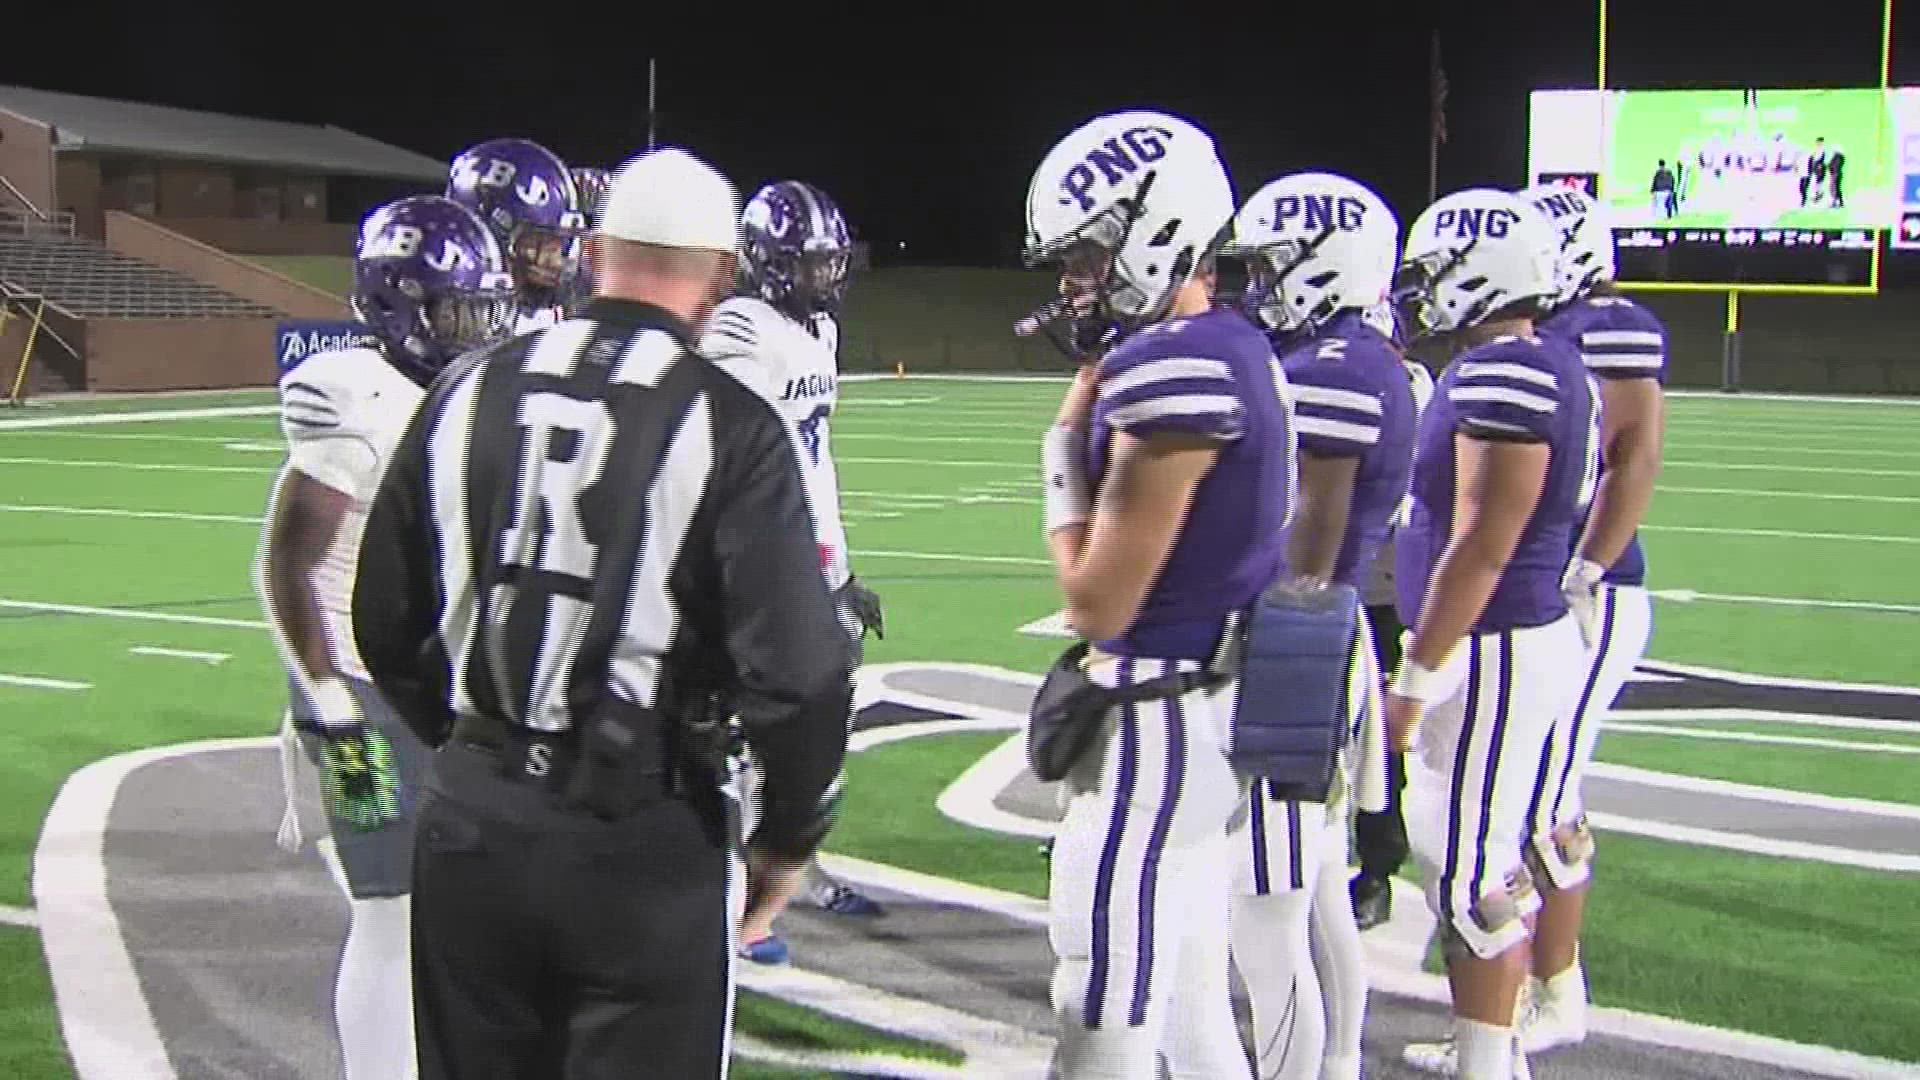 PNG will battle Brenham in the Regional playoffs after eliminating tenth ranked Austin LBJ